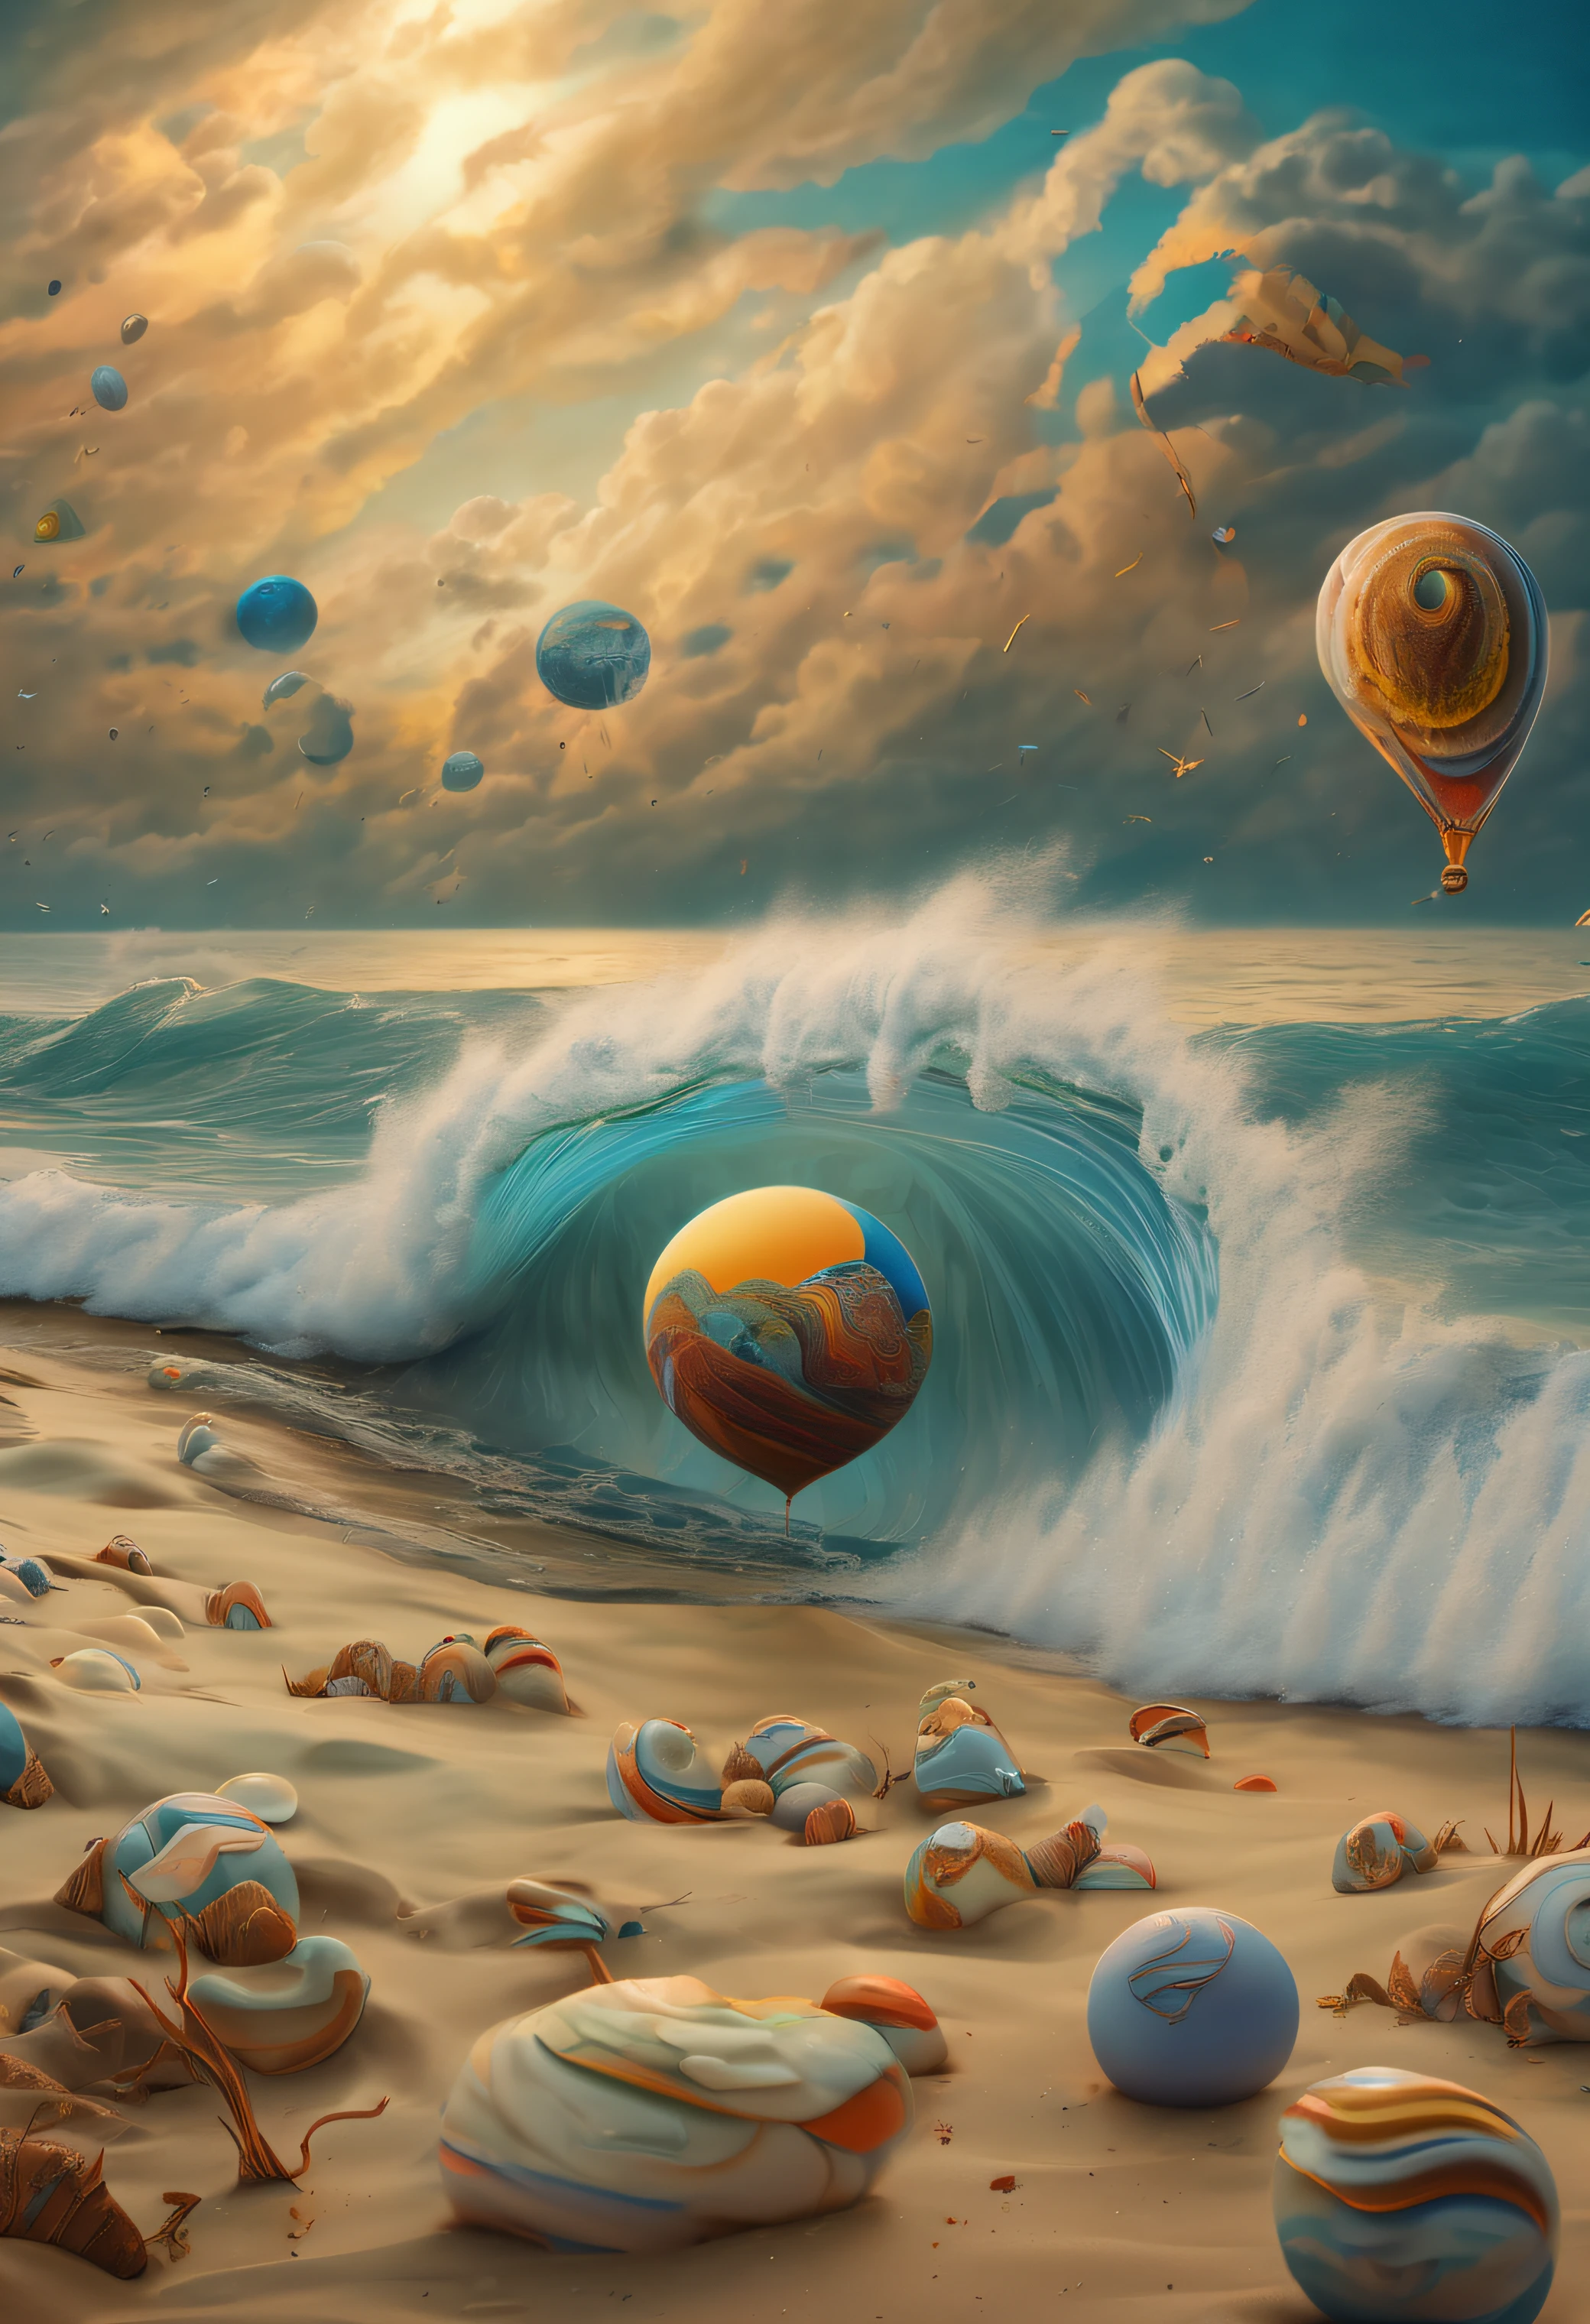 (best quality,4k,8k,highres,masterpiece:1.2),ultra-detailed,(realistic,photorealistic,photo-realistic:1.37), digital art by IrinaKapi, surrealism, sands of time, splash, patterns, floating objects, Yuumei, Robert Bissell, Christopher Balaskas, Keith Mallett, Wassily Kandinsky, acrylic painting, dreamlike atmosphere, intricate details, mesmerizing composition, ethereal beauty, mystical elements, whimsical landscapes, otherworldly creatures, intricate brushwork, surreal landscapes, fantastical imagery